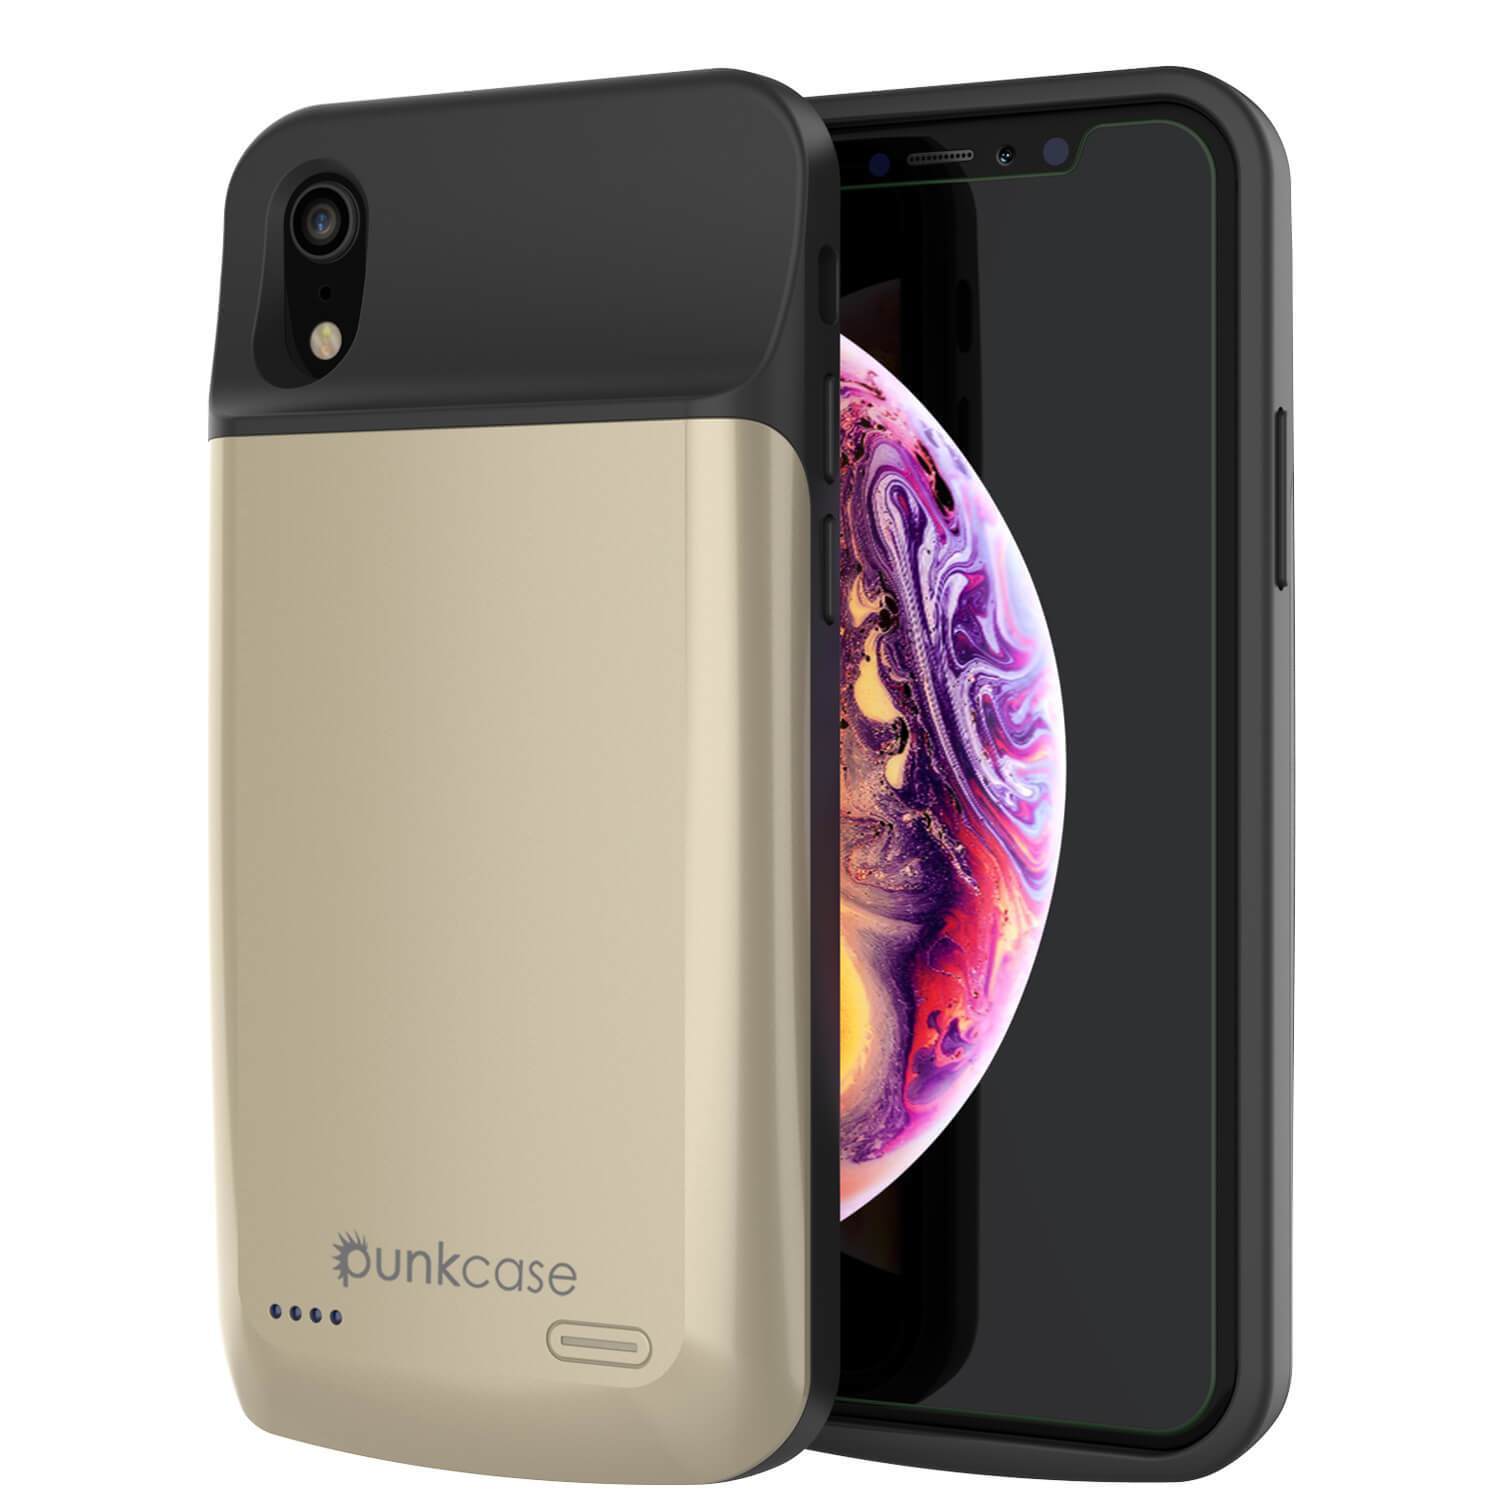 iPhone 11 Pro Battery Case, PunkJuice 5000mAH Fast Charging Power Bank W/ Screen Protector | [Gold] (Color in image: gold)